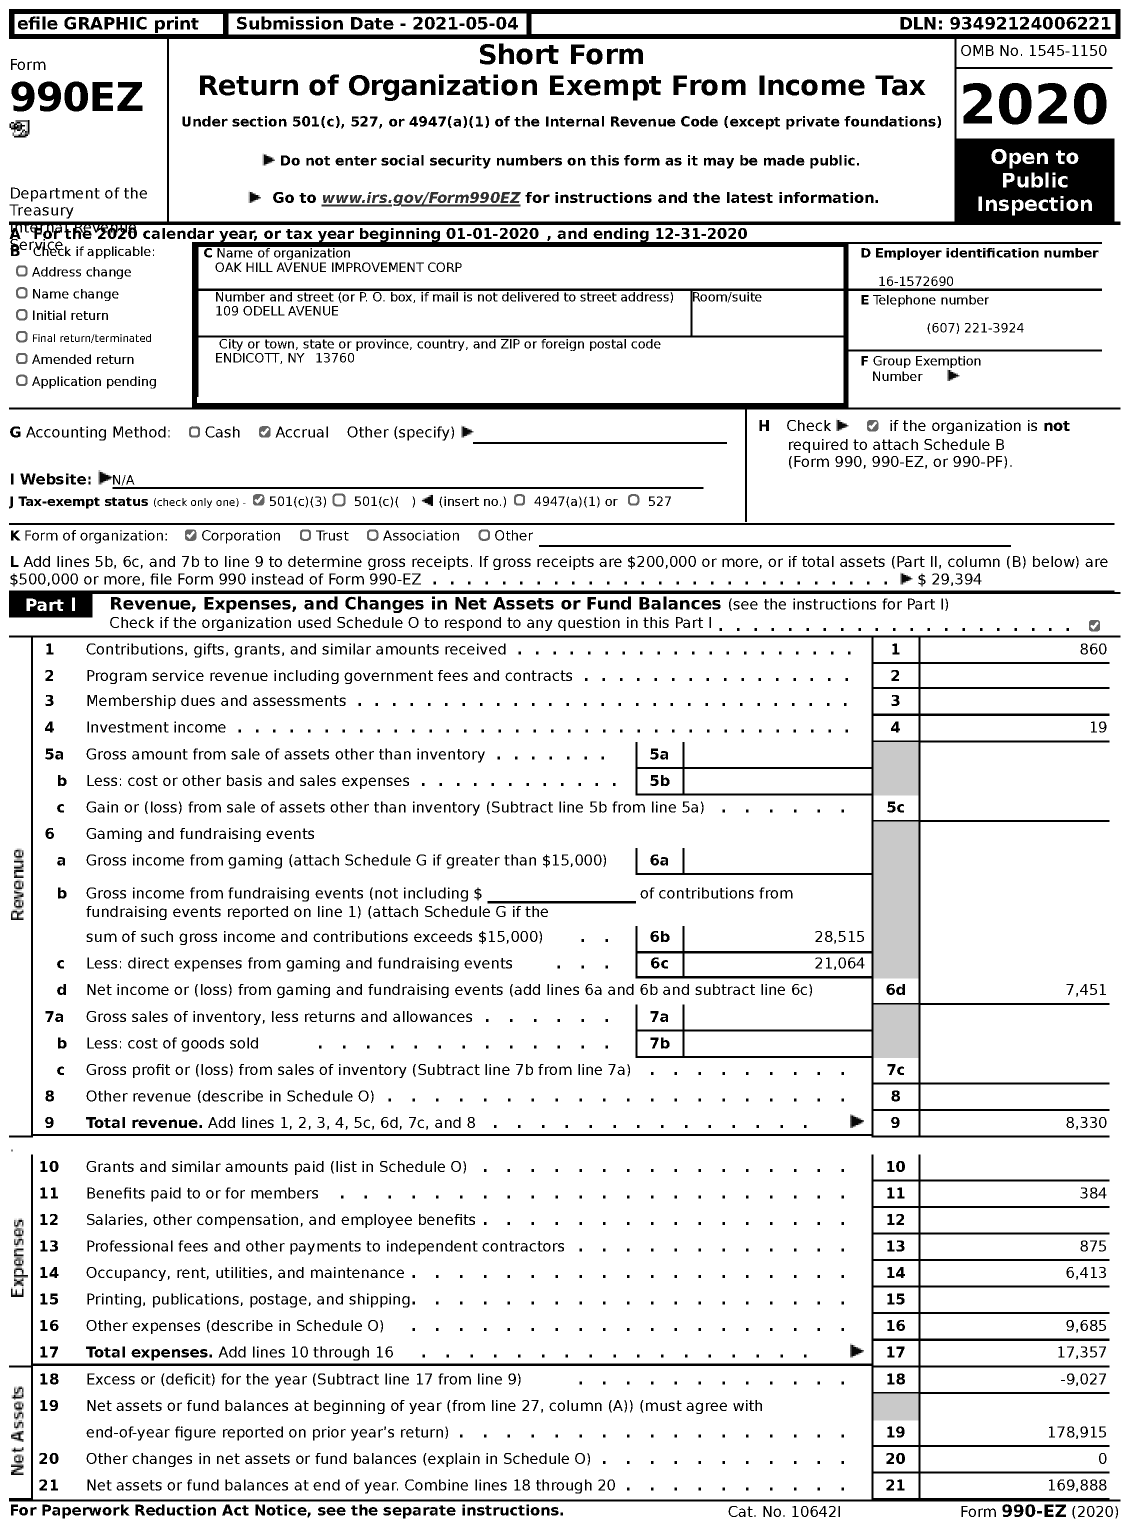 Image of first page of 2020 Form 990EZ for Oak Hill Avenue Improvement Corporation